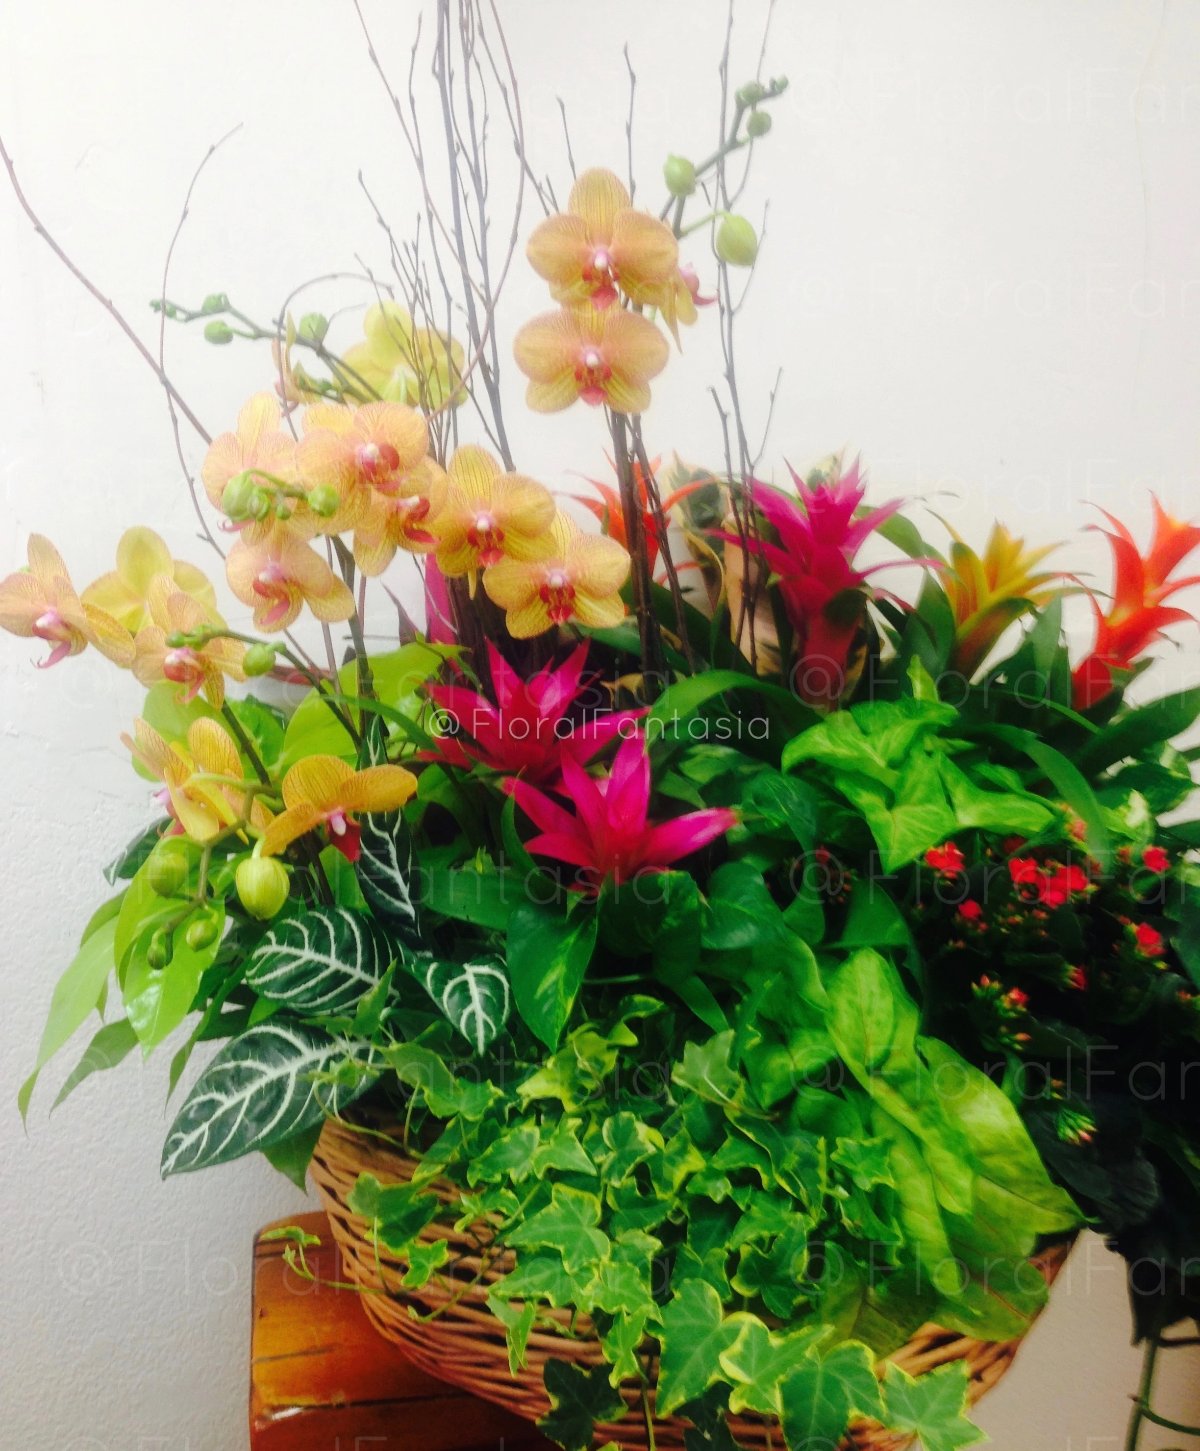 Assorted green and blooming plants, planted together in a basket or wood container. Deluxe gardens include Orchids.